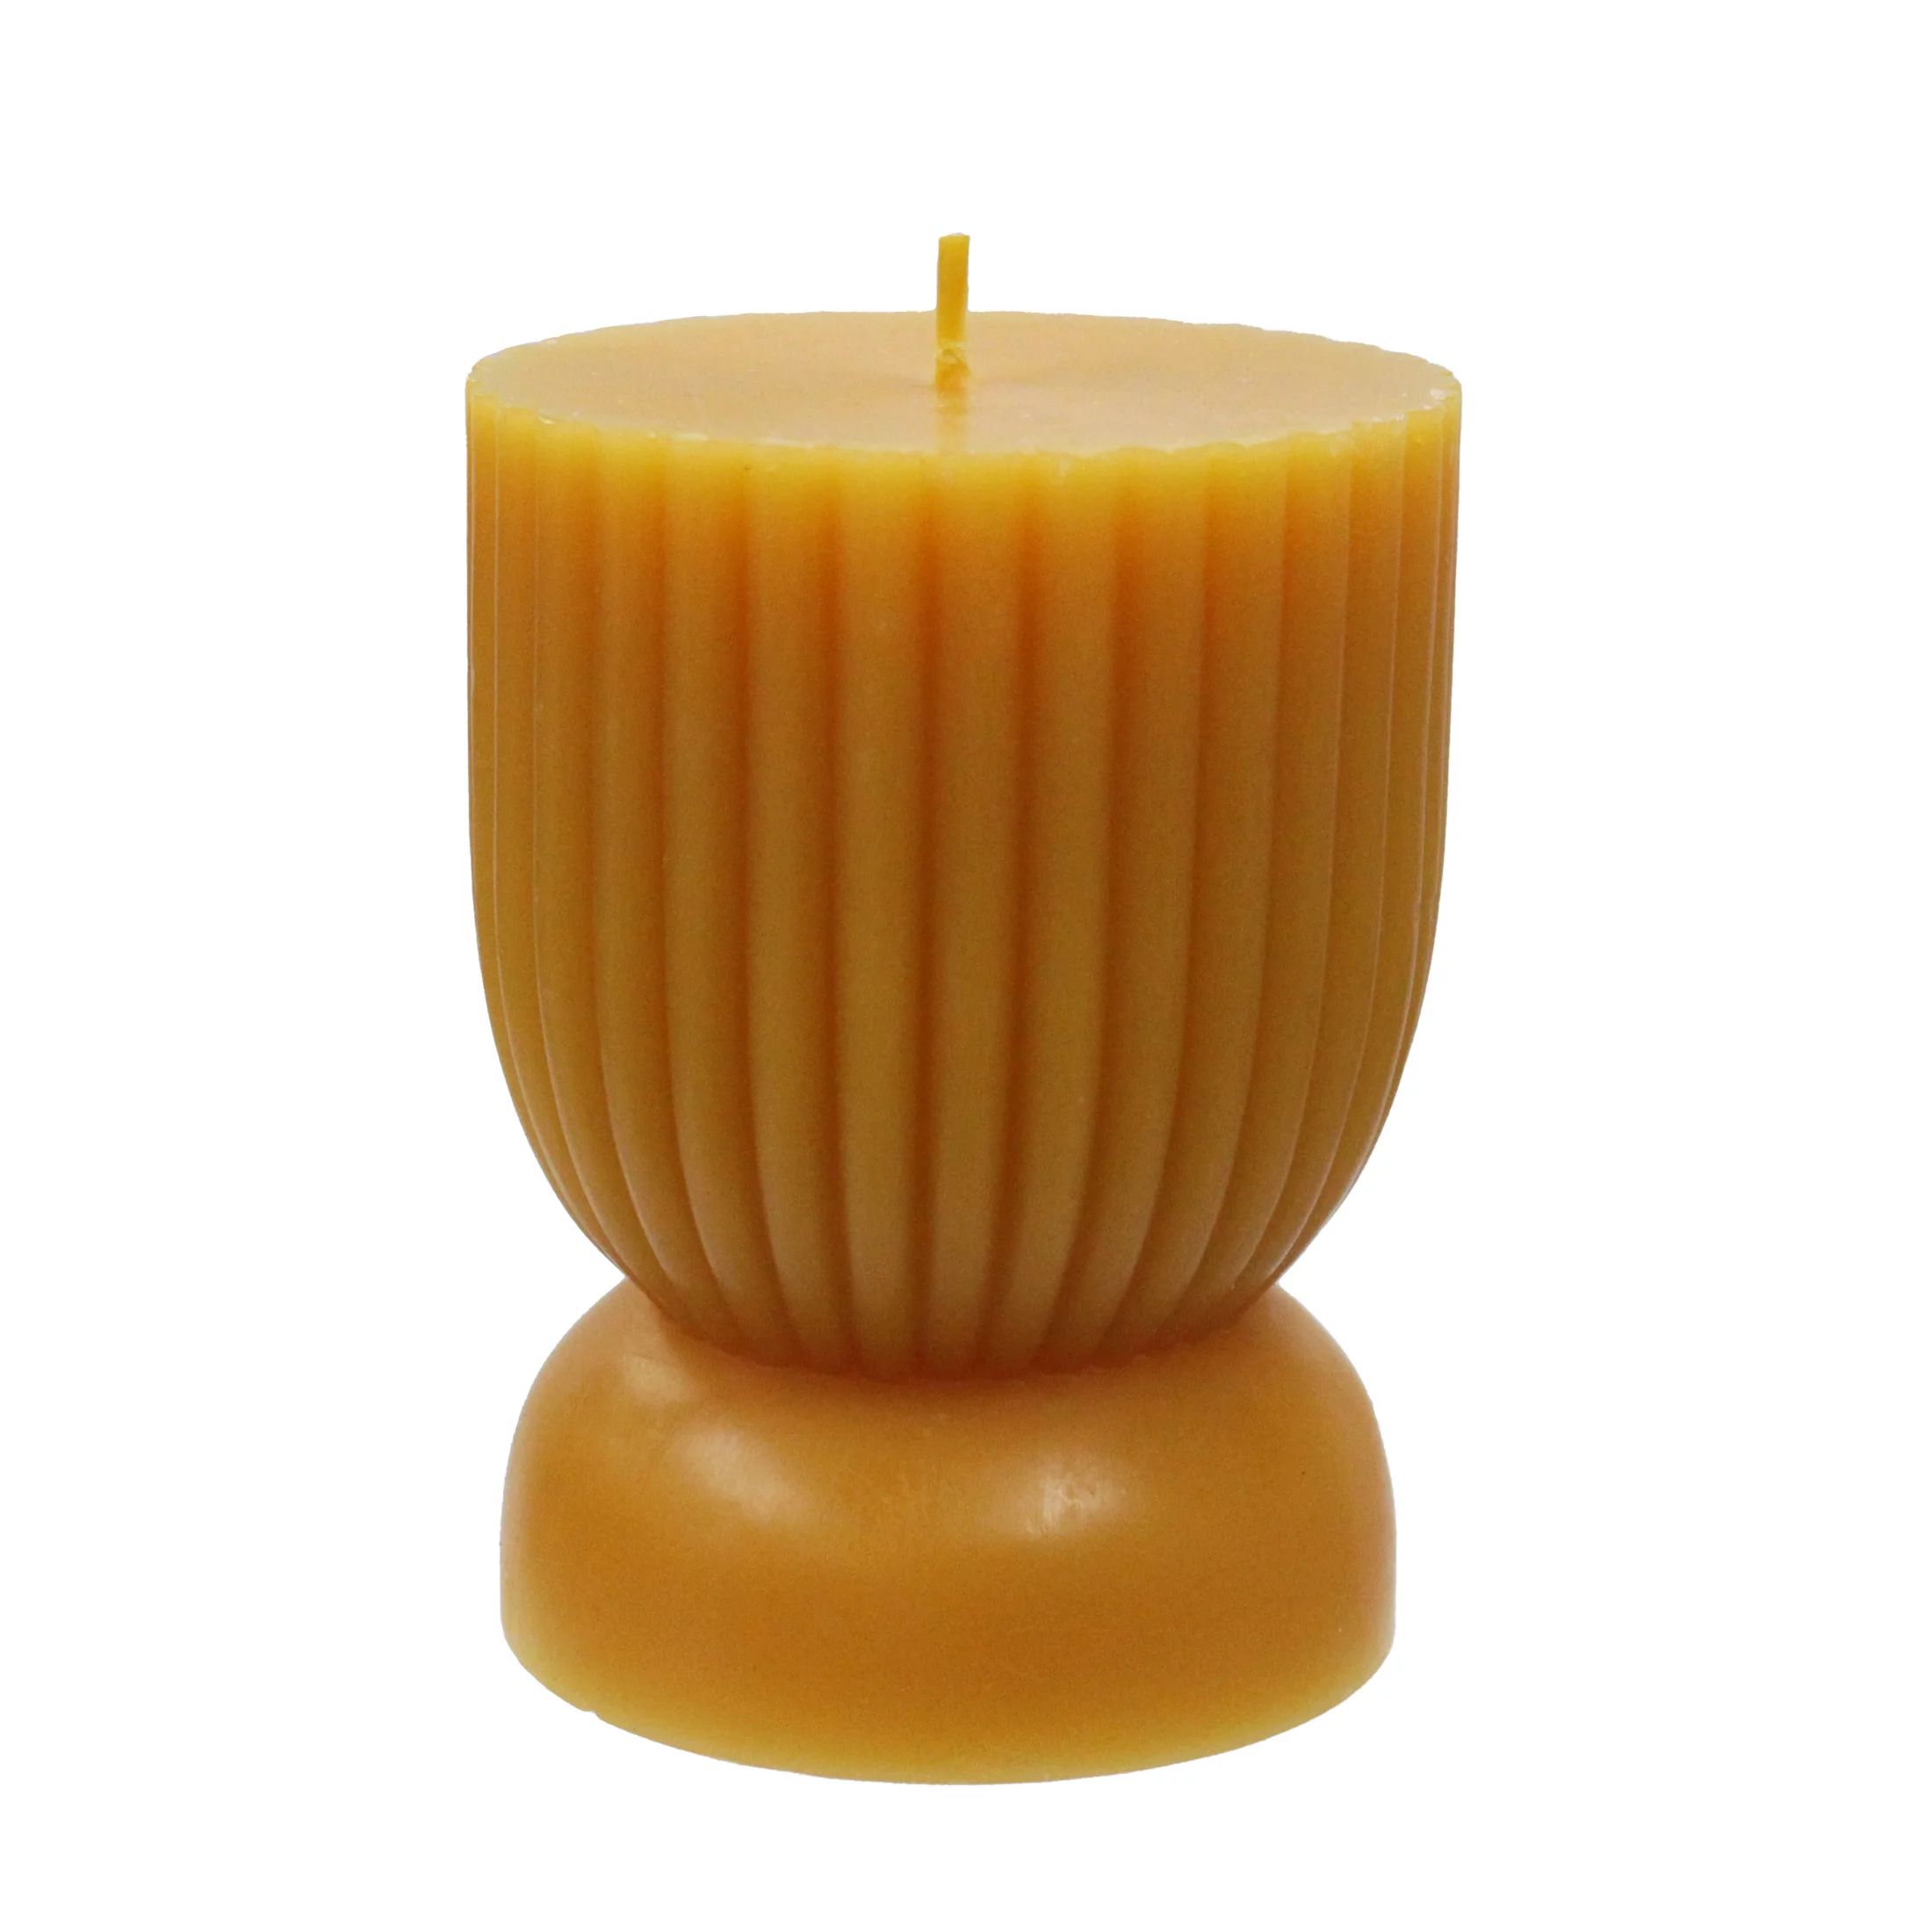 Better Homes & Gardens Unscented Ribbed Pillar Candle, 3x4 inches, Orange | Walmart (US)